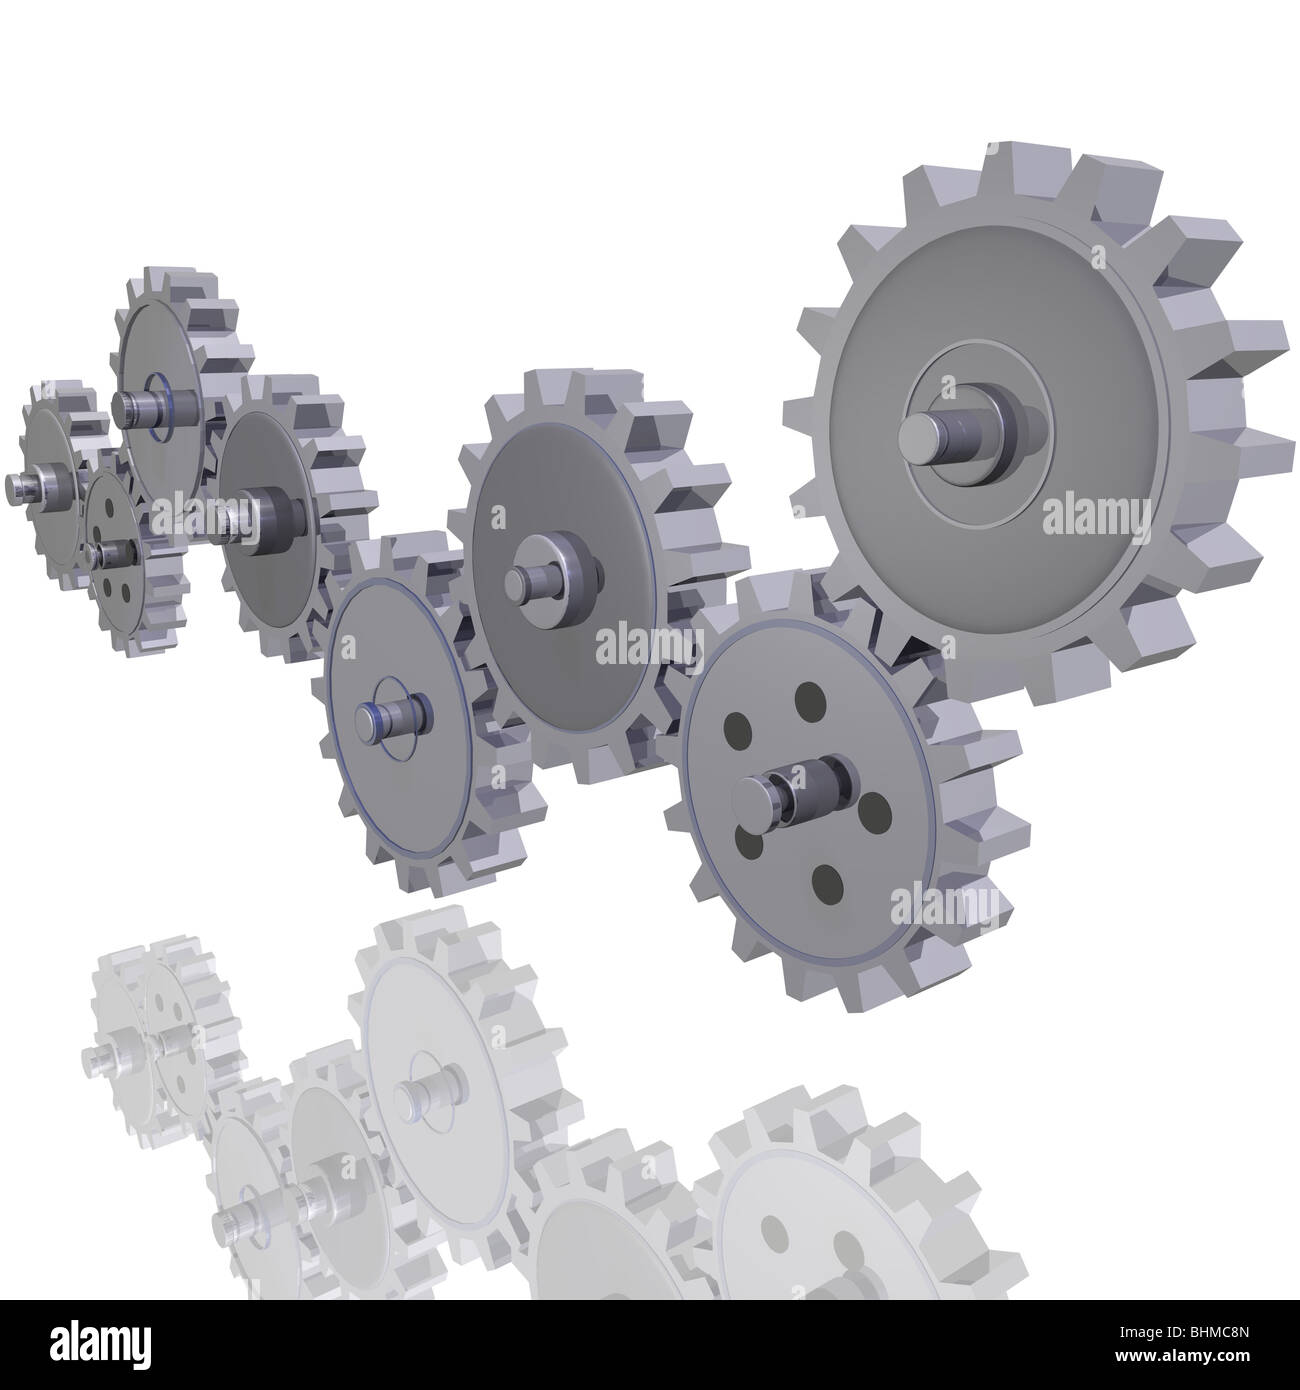 Image of various 3D gears. Stock Photo